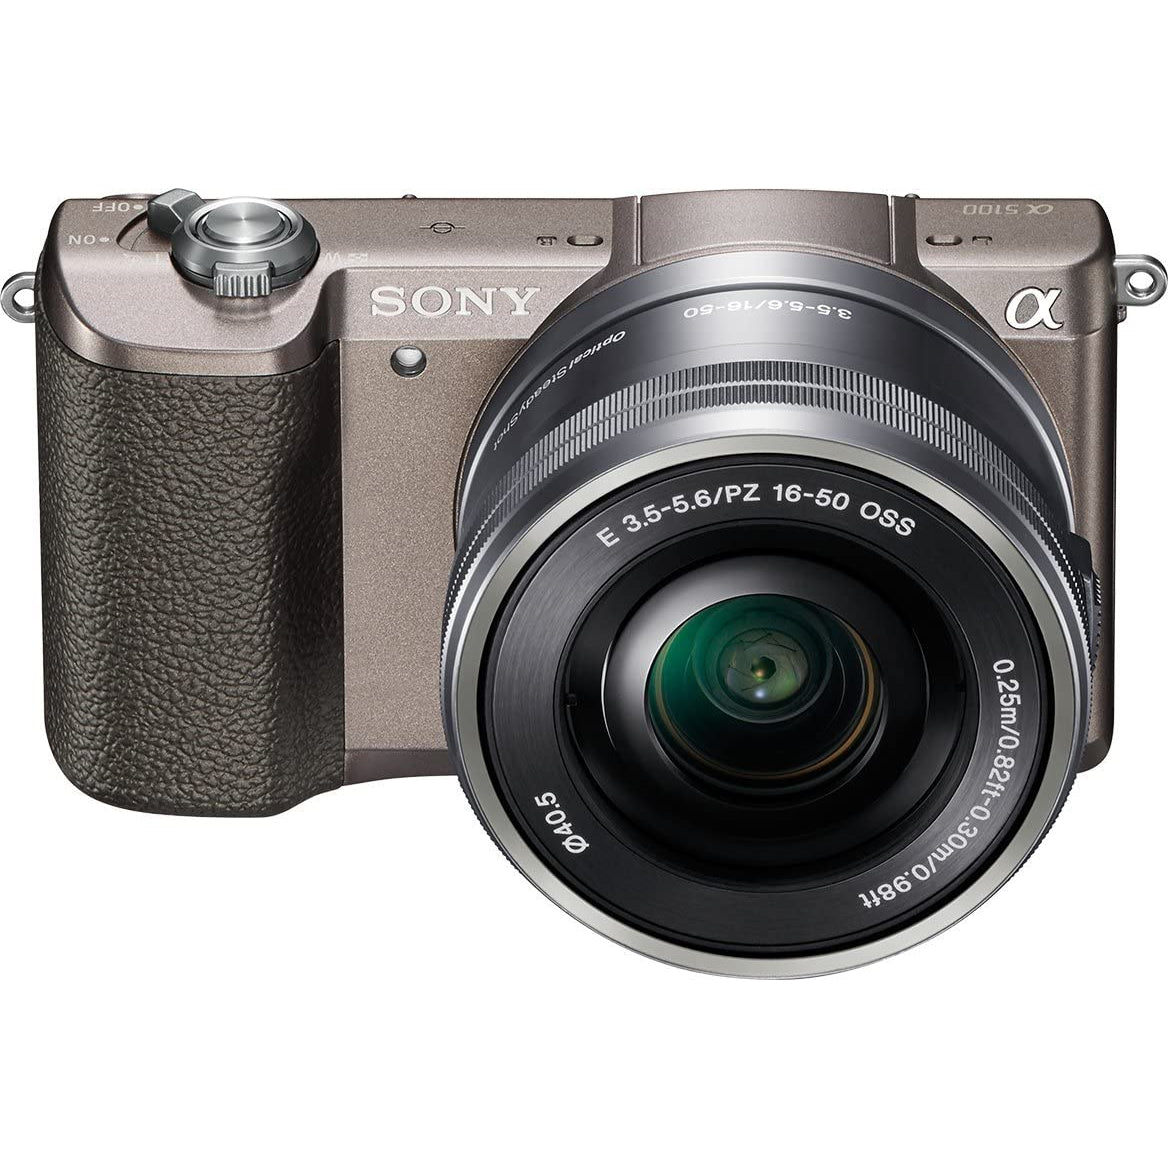 Sony A5100 Compact System Camera with 16-50mm OSS Lens